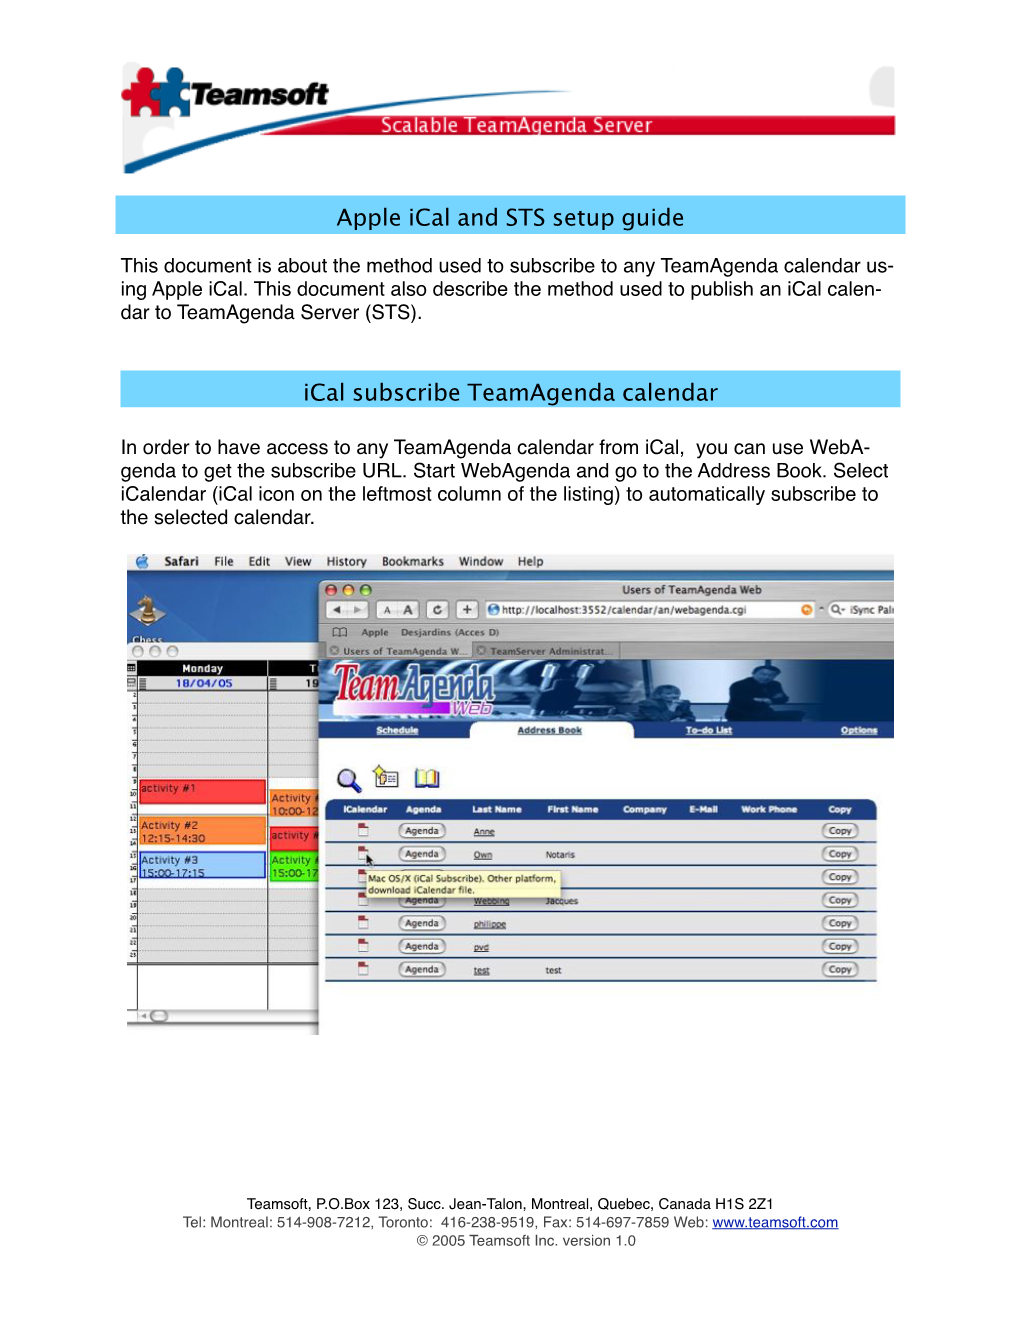 Ical Subscribe Teamagenda Calendar Apple Ical and STS Setup Guide